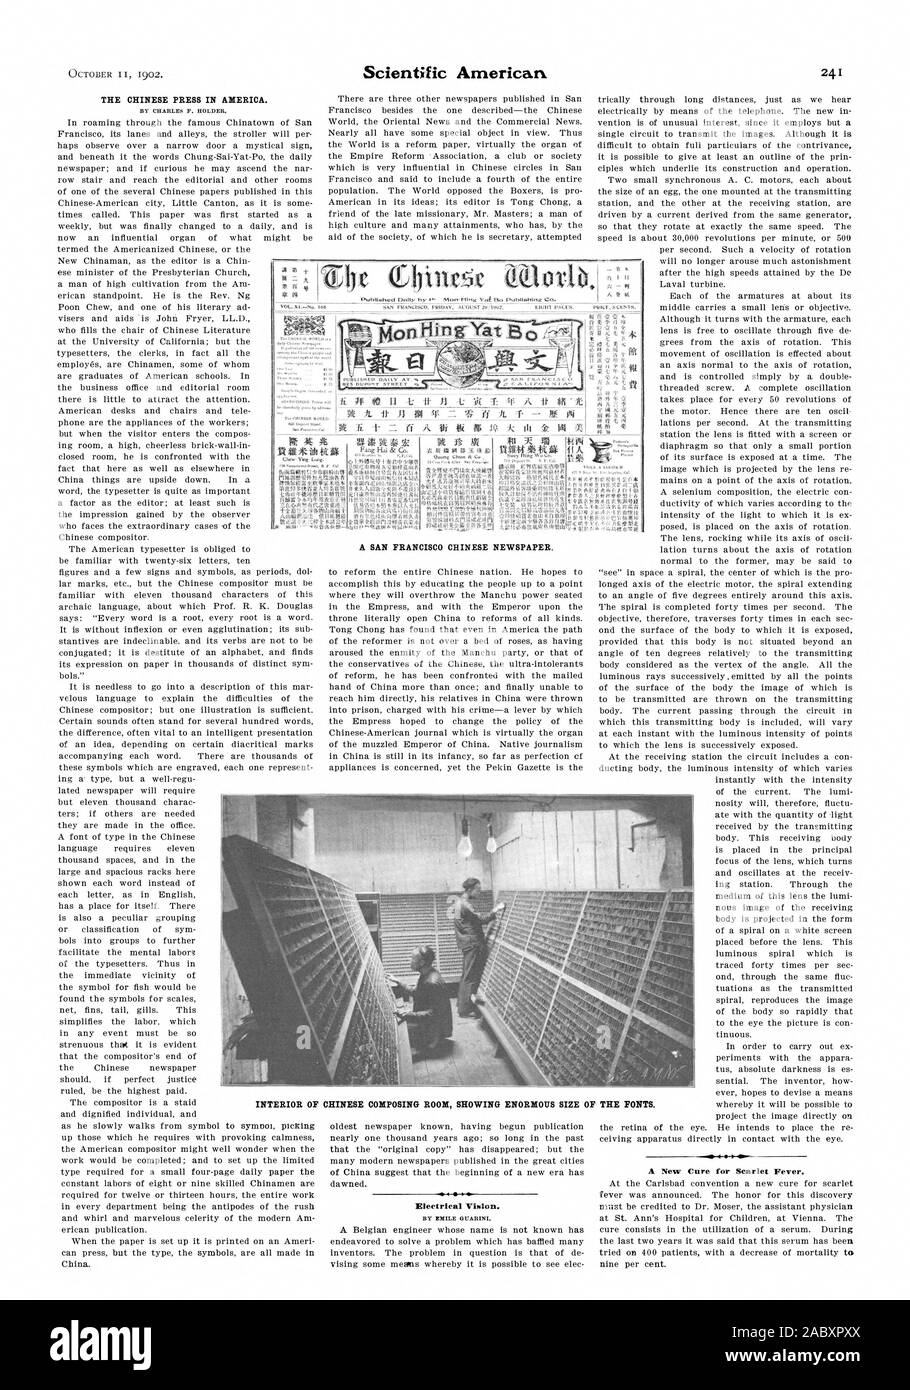 THE CHINESE PRESS IN AMERICA. BY CHARLES F. HOLDER. A SAN FRANCISCO CHINESE NEWSPAPER. Electrical Vision. BY MILLE GUARINI. A New Cure for Scarlet Fever. VOL.L—NA 164 4. 1 SAN FRANCISCO. FRIDAY. ALOUSF 1502. EMMY PAC PREF.ACEMS. Tbn CHIA ESE Anntem. dAily Ns ne NM CIAA Vie IAA. Ptar nOvE41. Tema it F1' If LI A. it  II IN lit A t : fi' tiMUS 14501:thRit if A. f  P4 :n3 i ALI.174 INTERIOR OF CHINESE COMPOSING ROOM SHOWING ENORMOUS SIZE OF, scientific american, 1902-10-11 Stock Photo